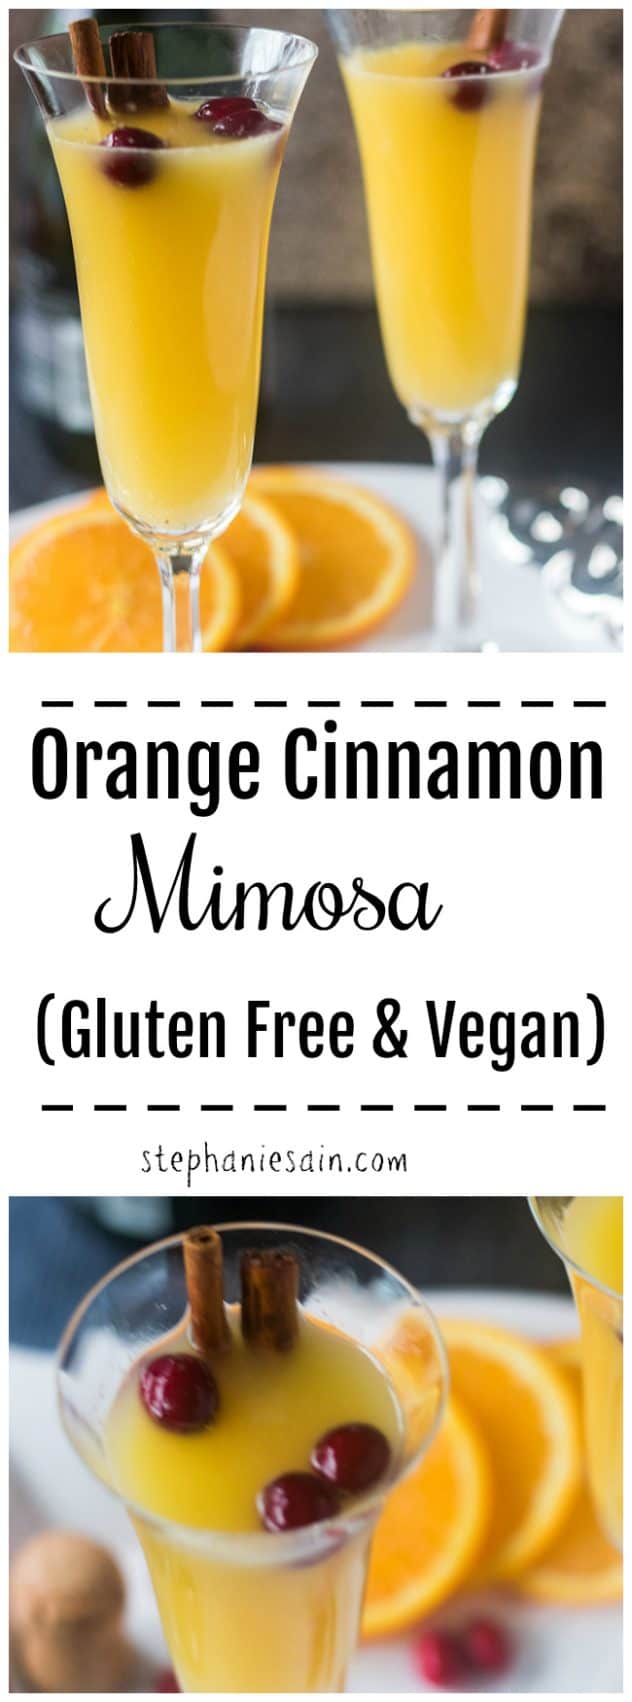 This Mimosa recipe is a classic and super easy to make. Perfect for a holiday celebration or special brunch. Champagne and orange juice combined for the perfect tasty drink and garnished with cinnamon sticks and cranberries. Vegan & GF. 